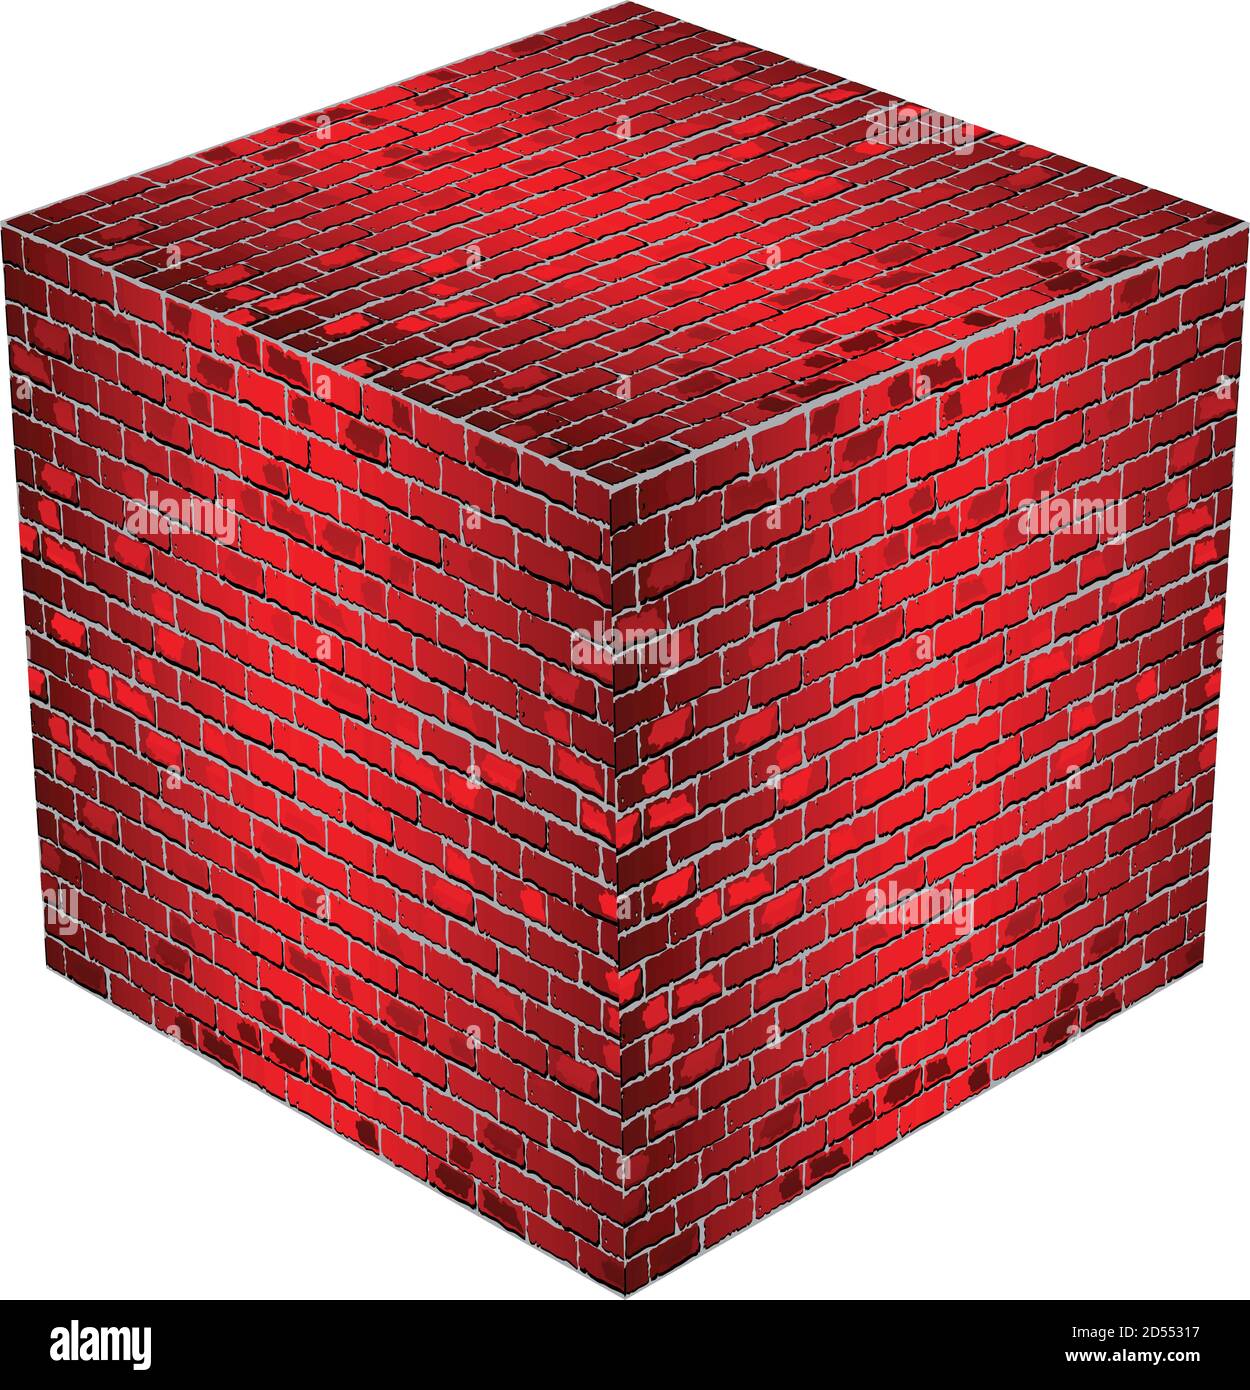 A cube made of red bricks - Illustration,  Red abstract vector illustration Stock Vector